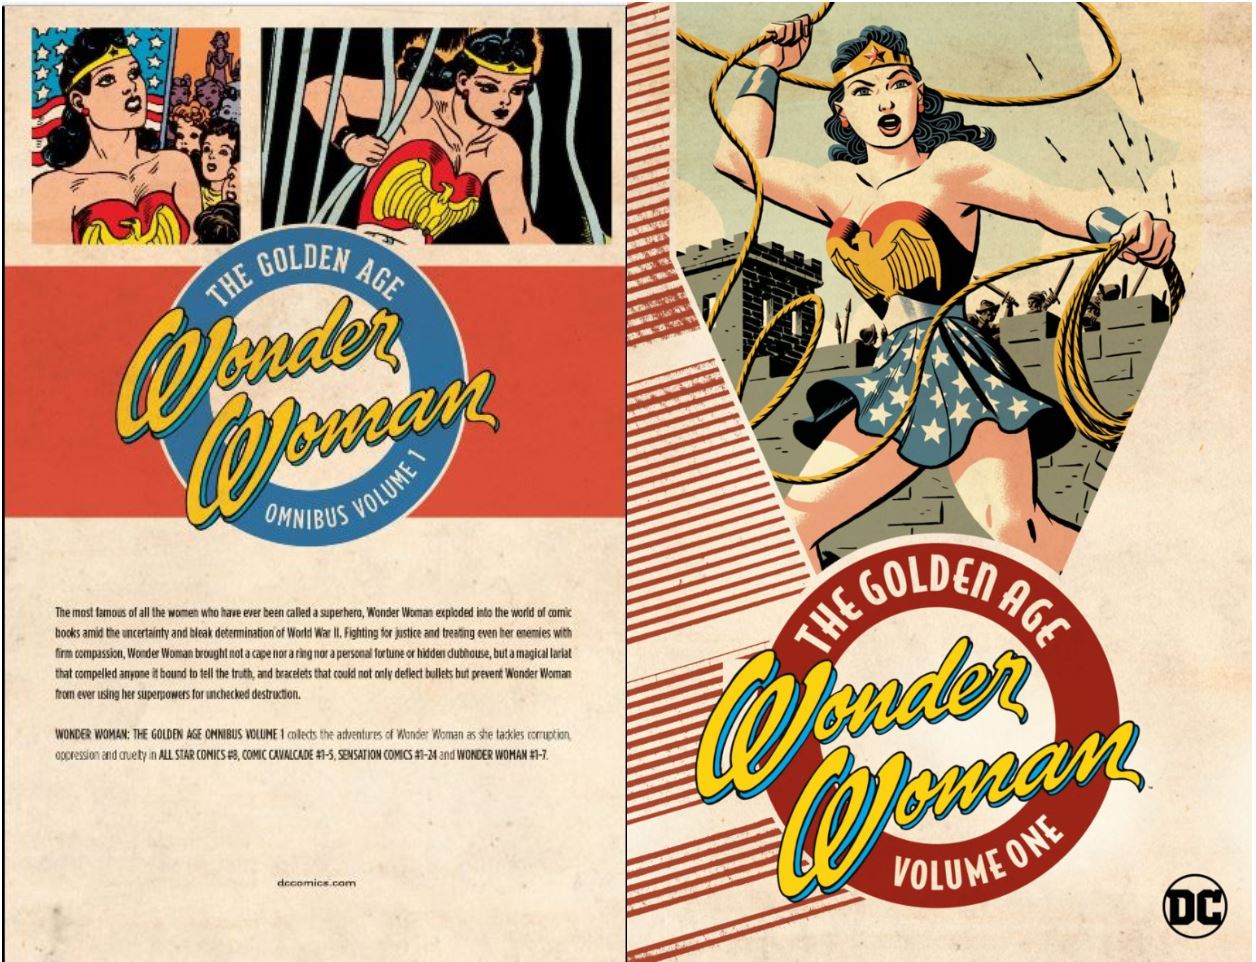 1981 Wonder Woman Concept Art for Underoos by Alex Toth with Scott